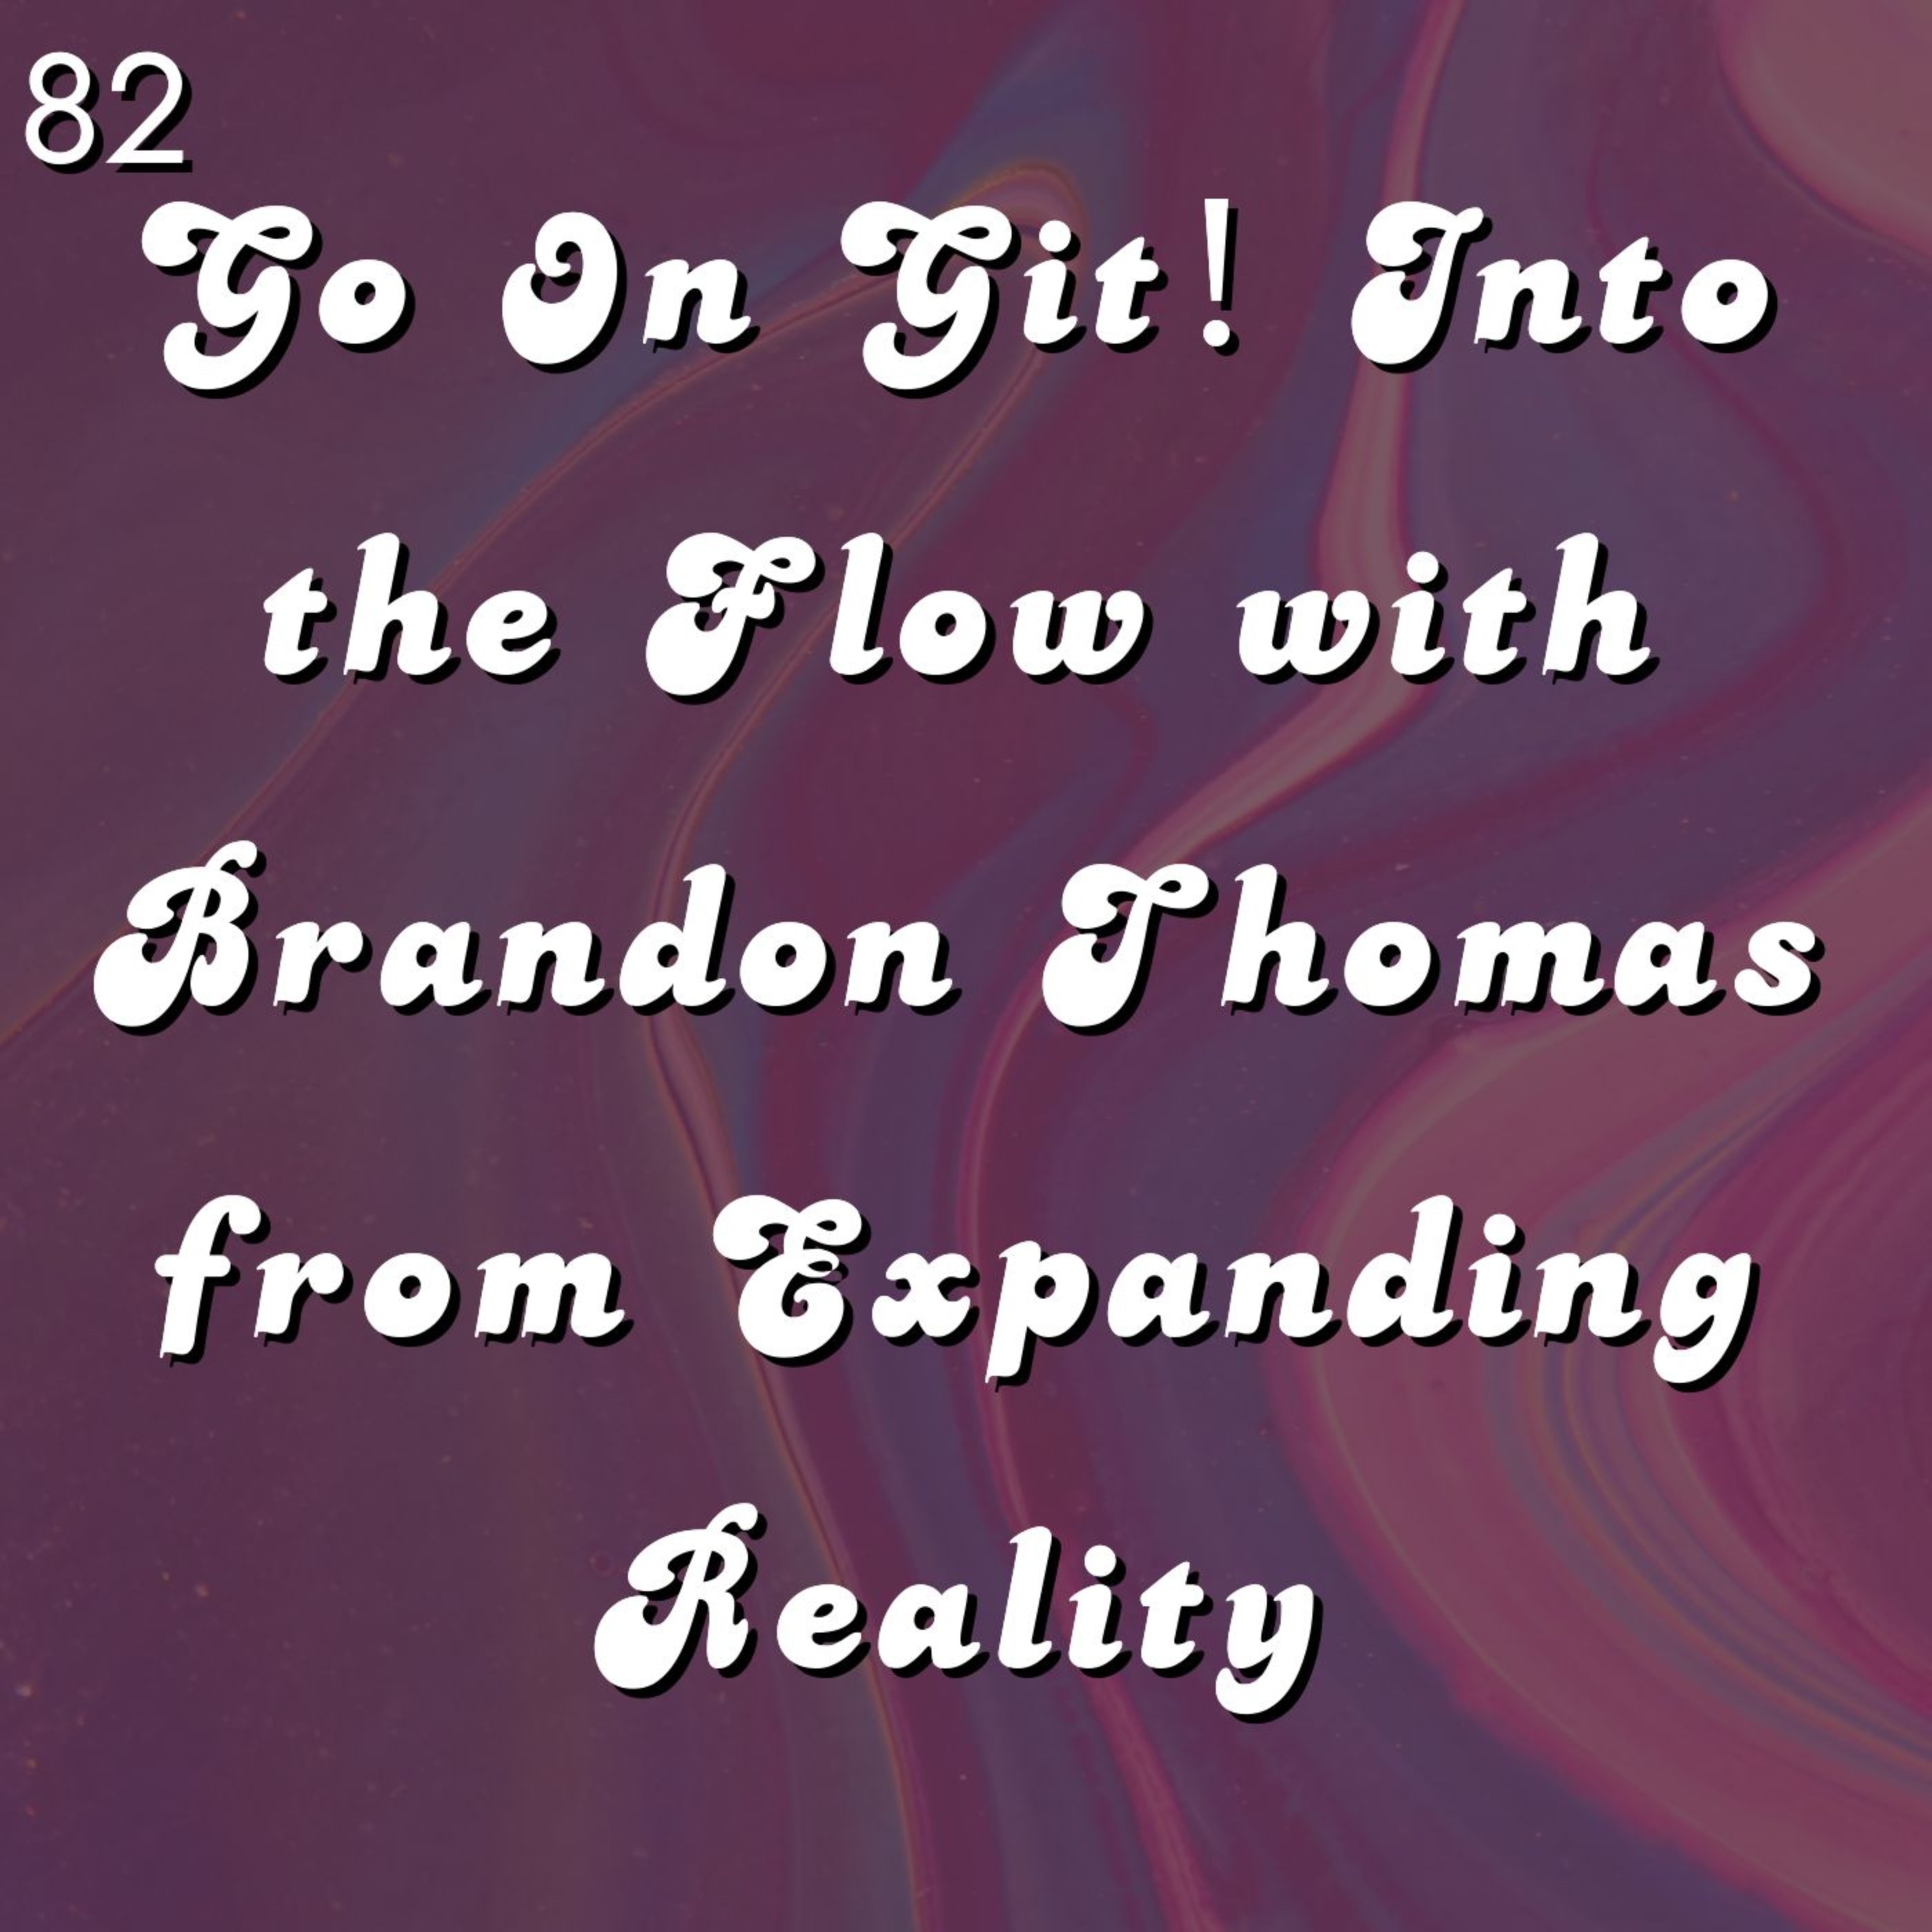 #82 - Go On Git! Into the Flow with Brandon Thomas from Expanding Reality